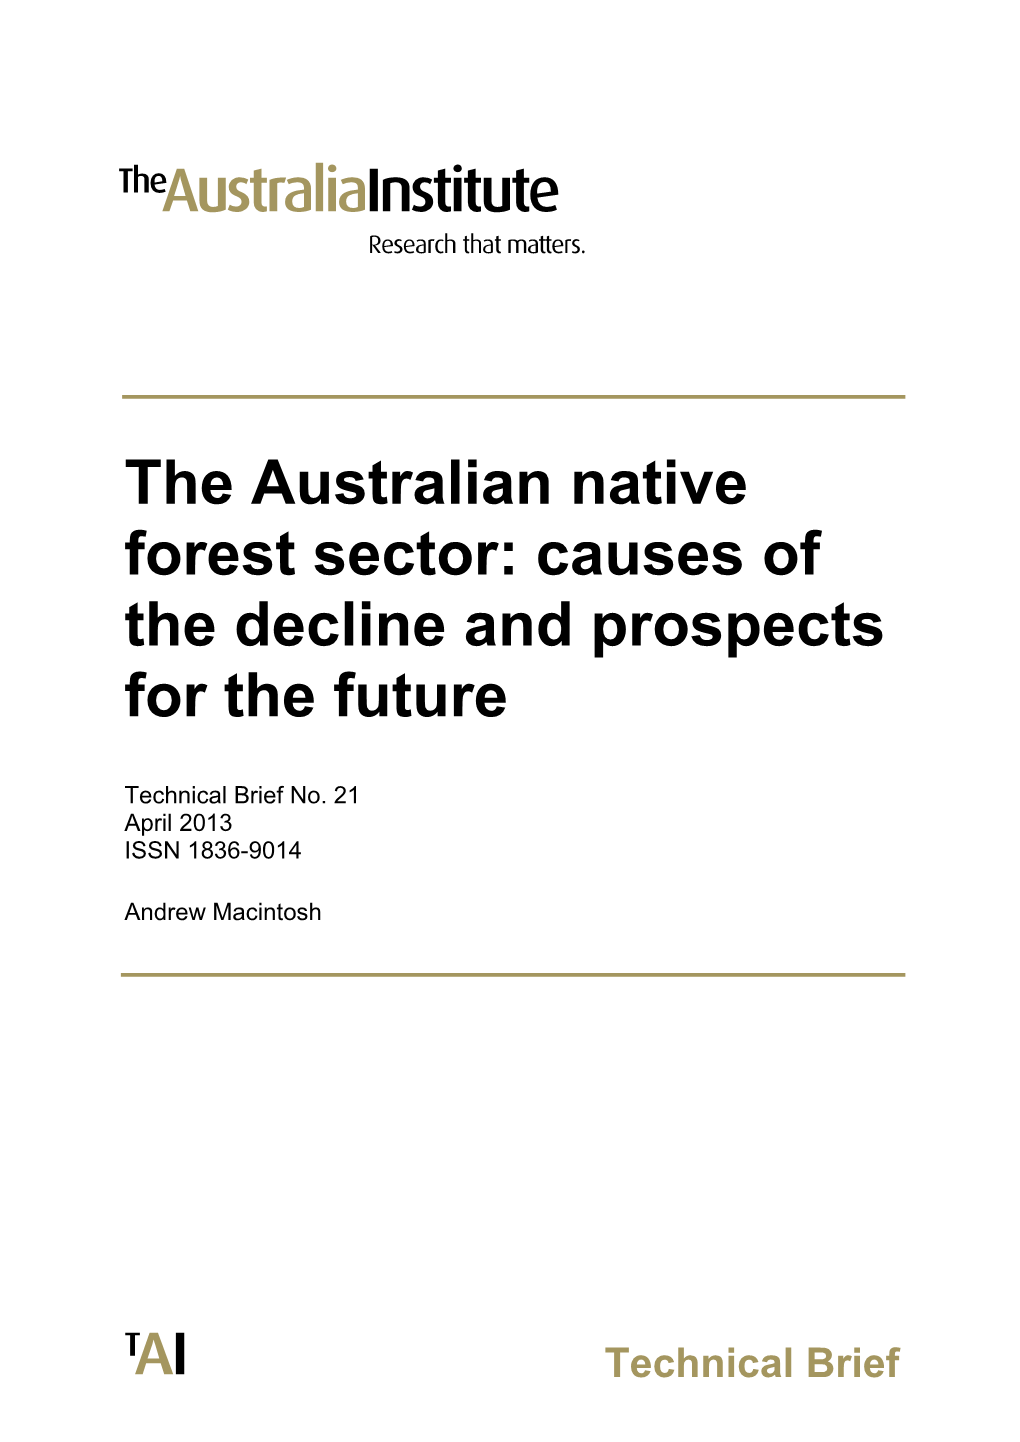 The Australian Native Forest Sector: Causes of the Decline and Prospects for the Future